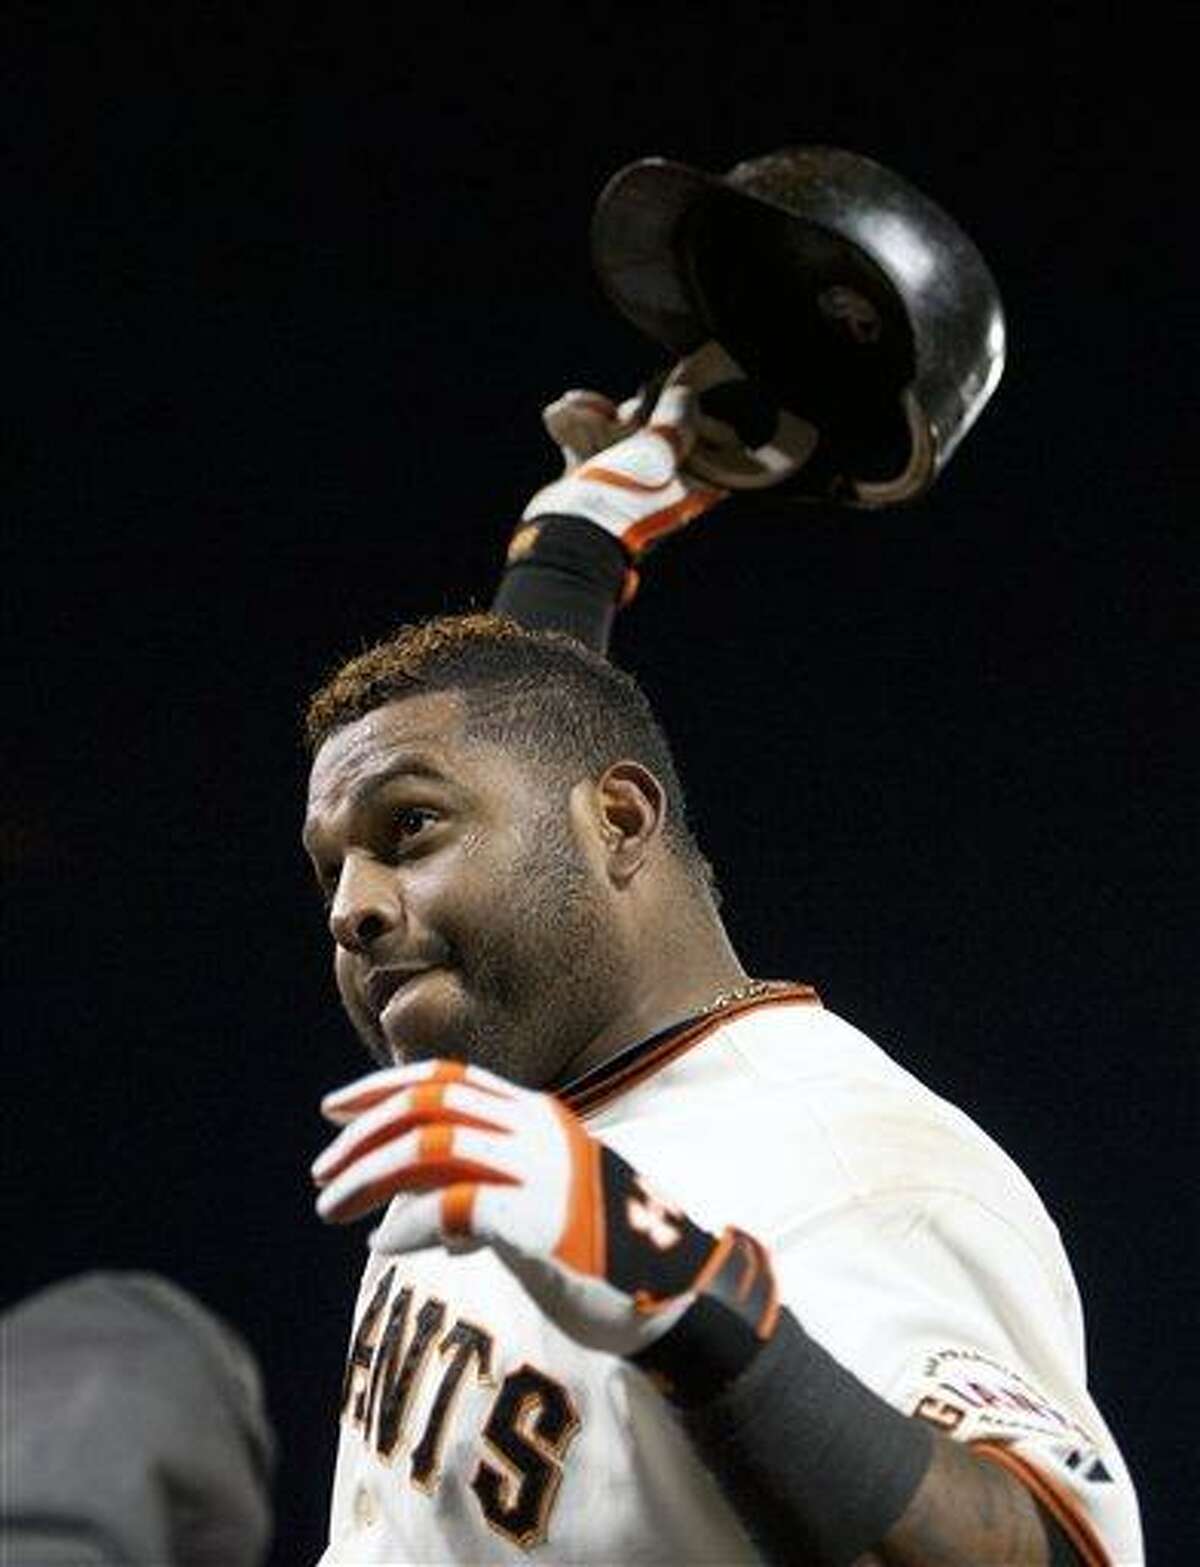 San Francisco Giants' Pablo Sandoval tips his helmet to the crowd after hitting his third home run against the Detroit Tigers during Game 1 of baseball's World Series, Wednesday, Oct. 24, 2012, in San Francisco. (AP Photo/The Sacramento Bee, Paul Kitagaki Jr.) MAGS OUT; TV OUT (KCRA3, KXTV10, KOVR13, KUVS19, KMAZ31, KTXL40) MANDATORY CREDIT